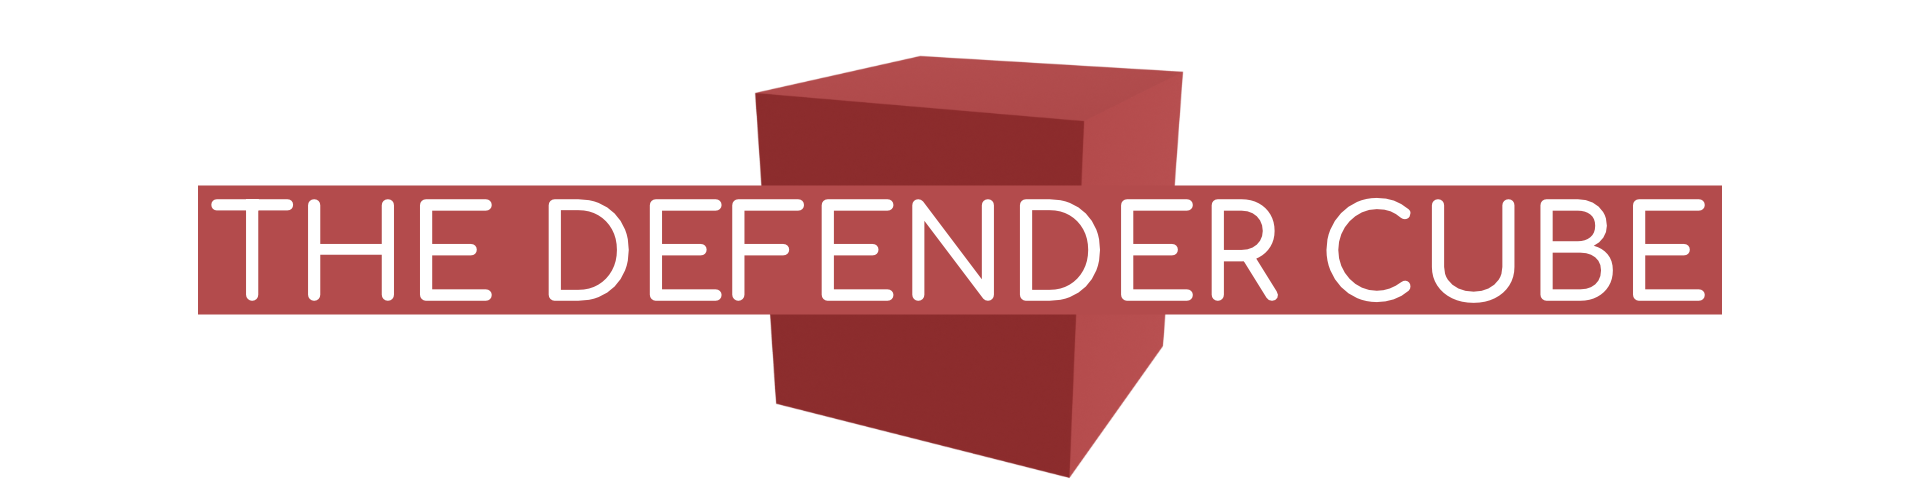 The Defender Cube (2018)